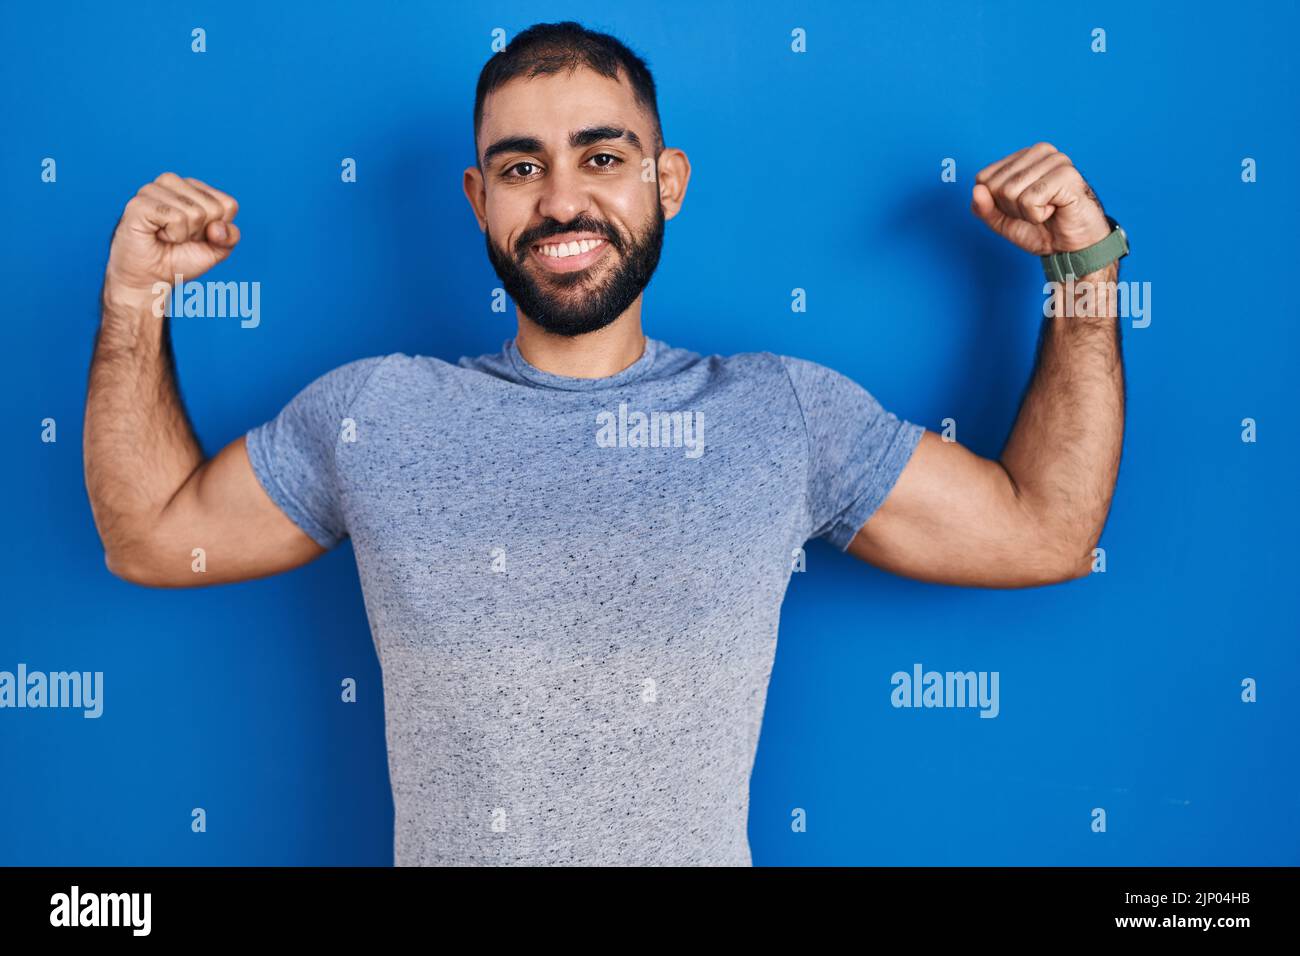 Middle east man with beard standing over blue background showing arms muscles smiling proud. fitness concept. Stock Photo